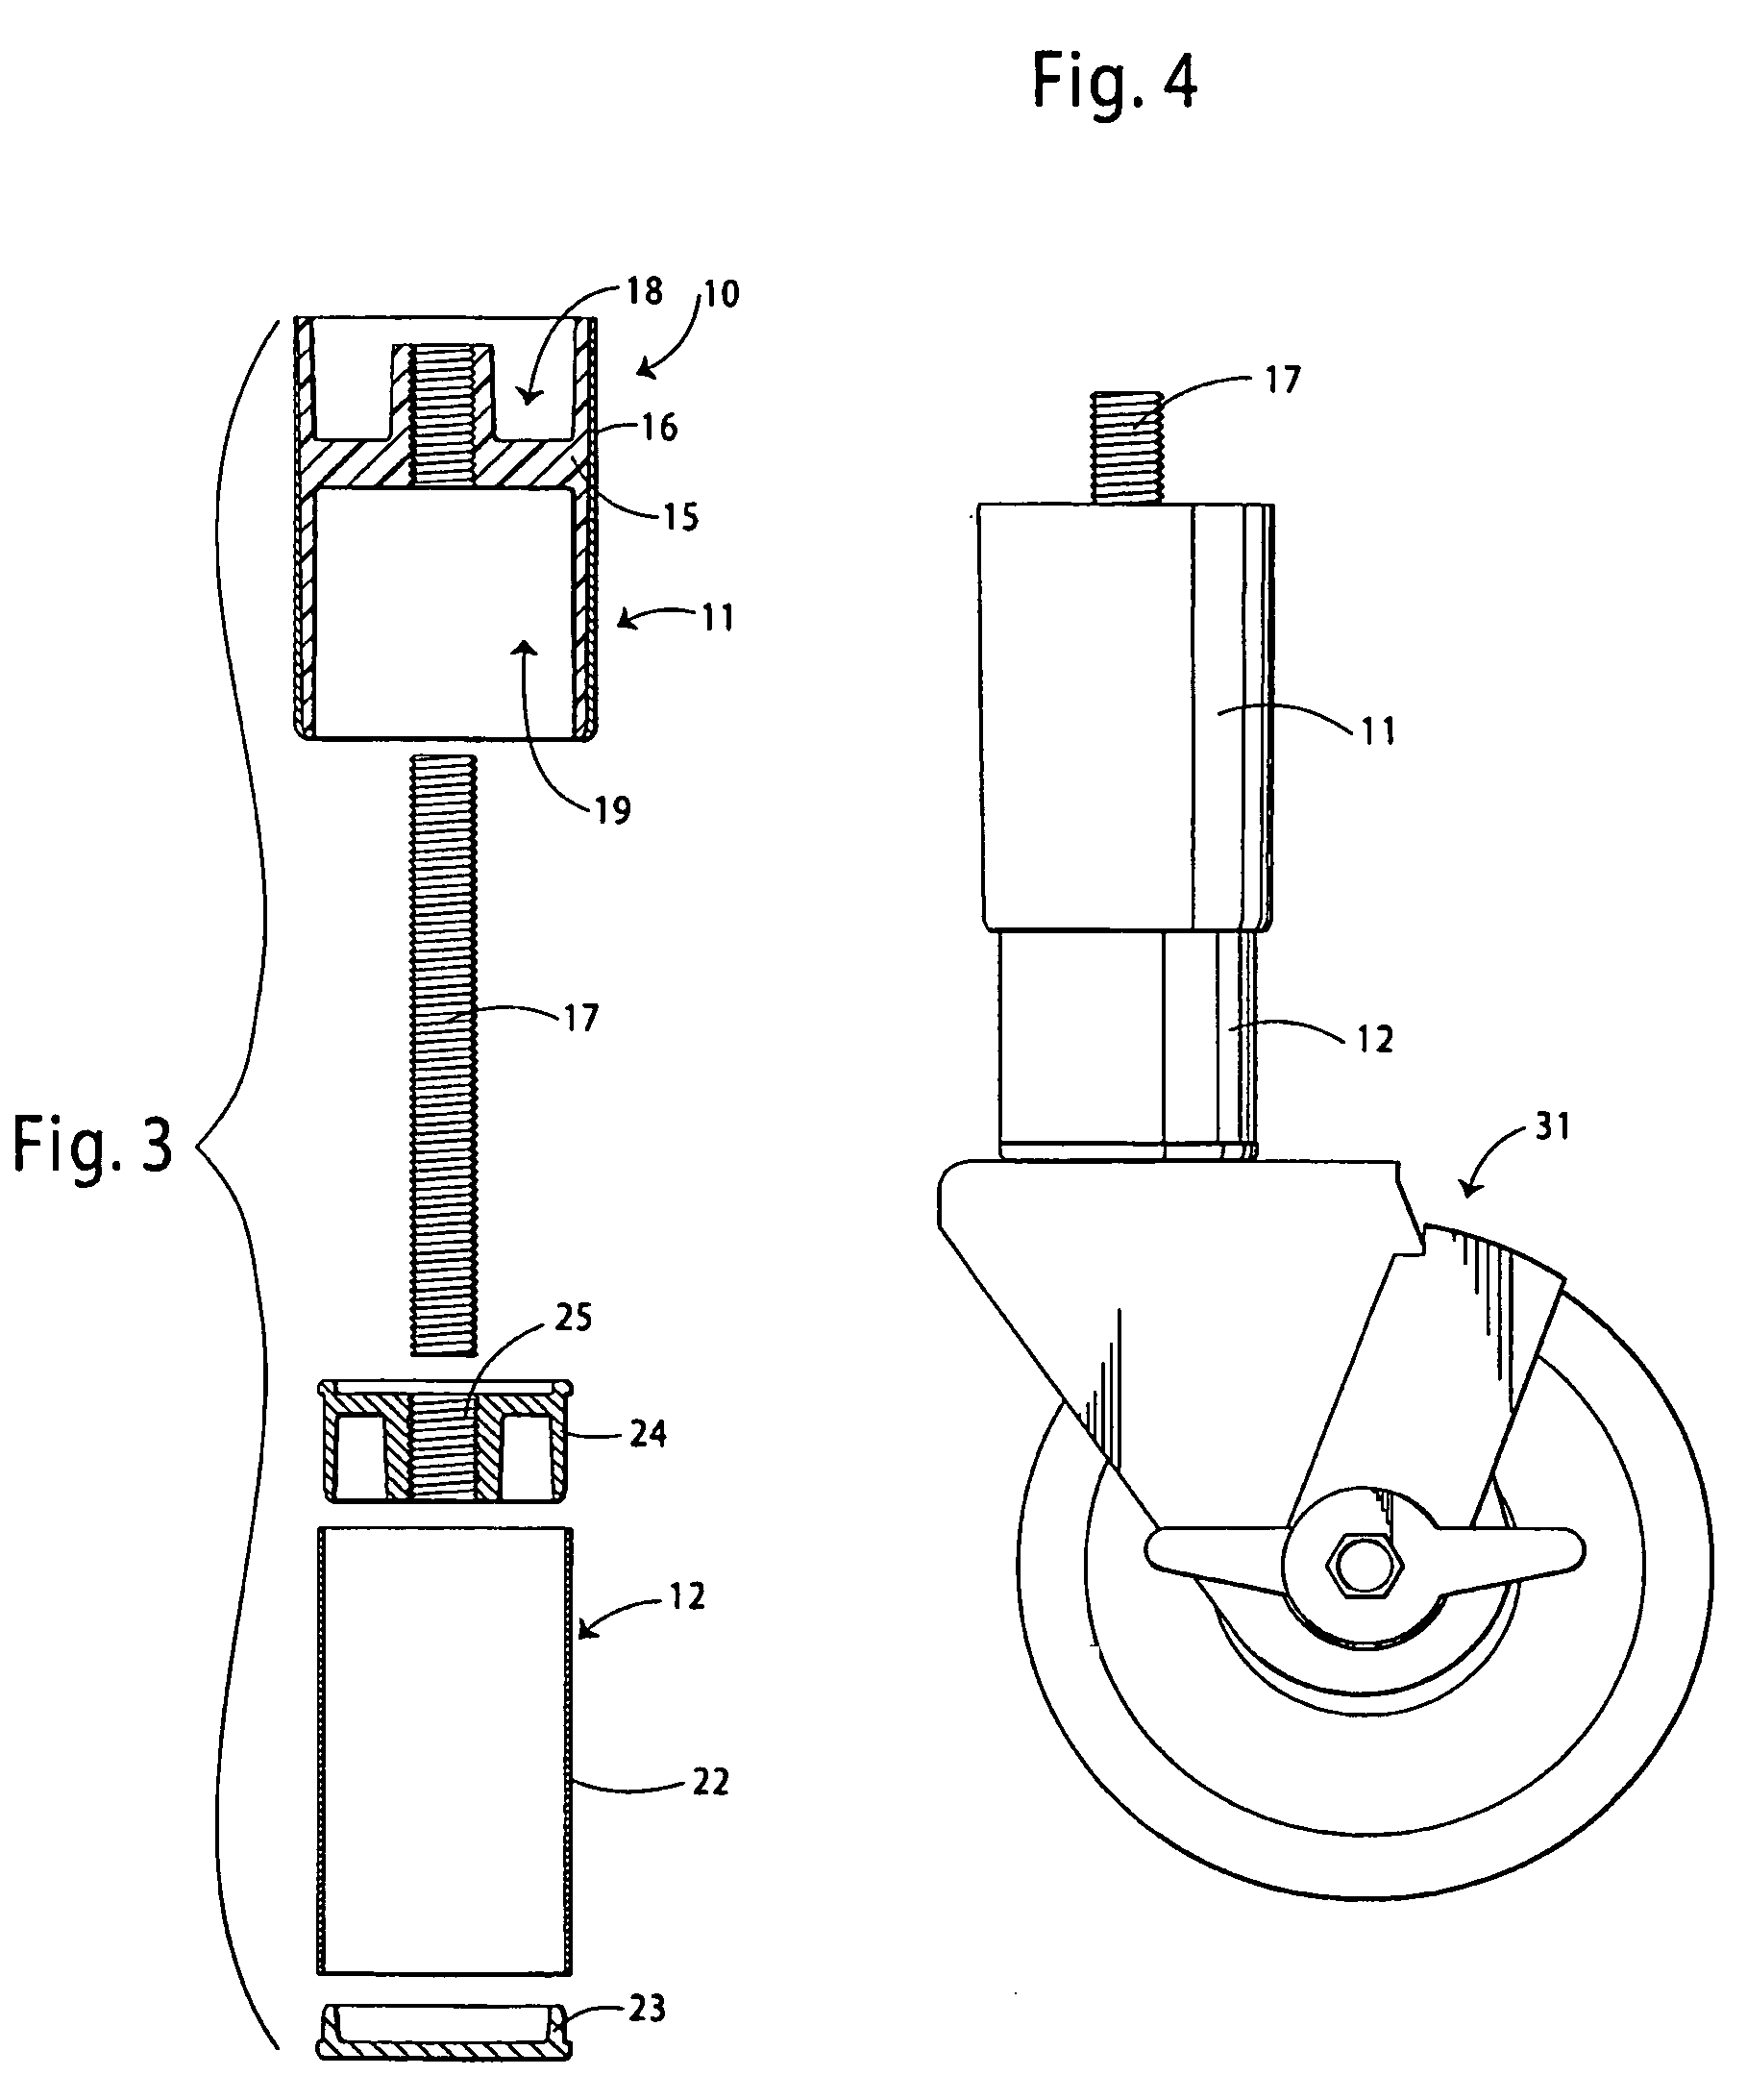 Height adjustable support for food service equipment